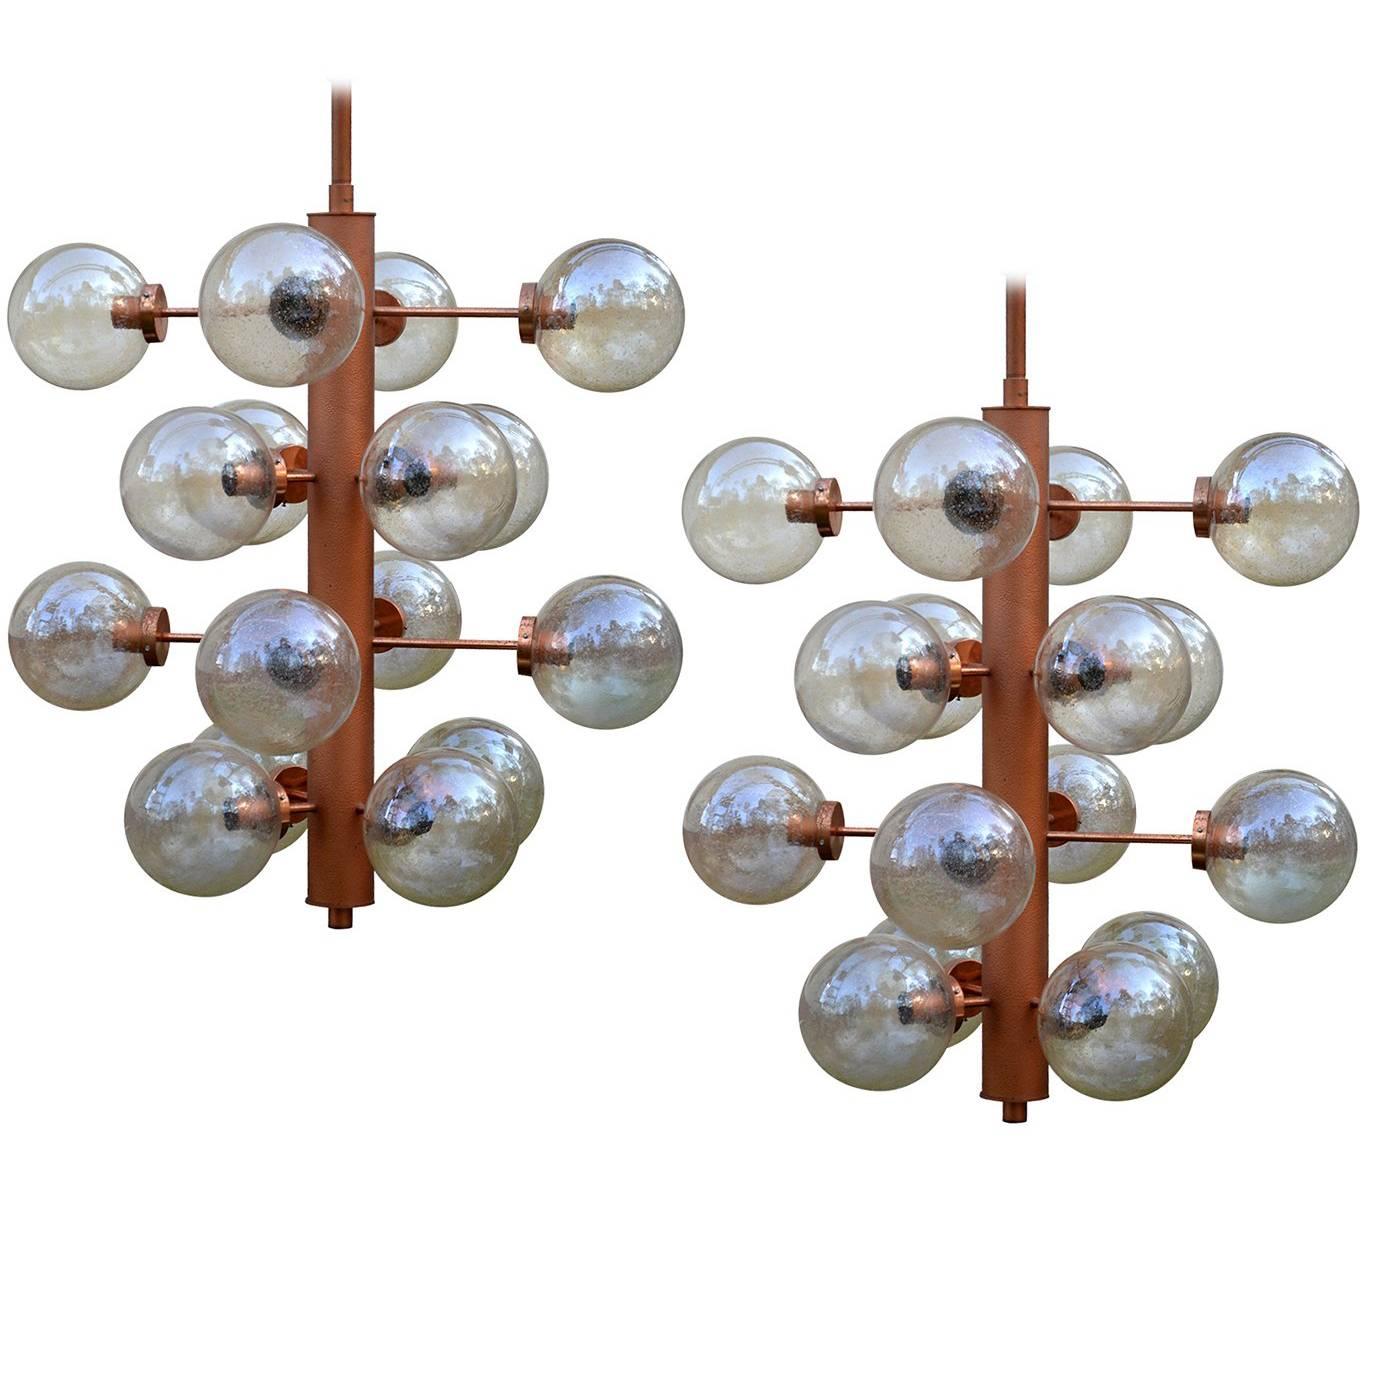 Pair of Giant Sputnik Chandeliers Pendants with 16 Glass Globes, Germany, 1960s